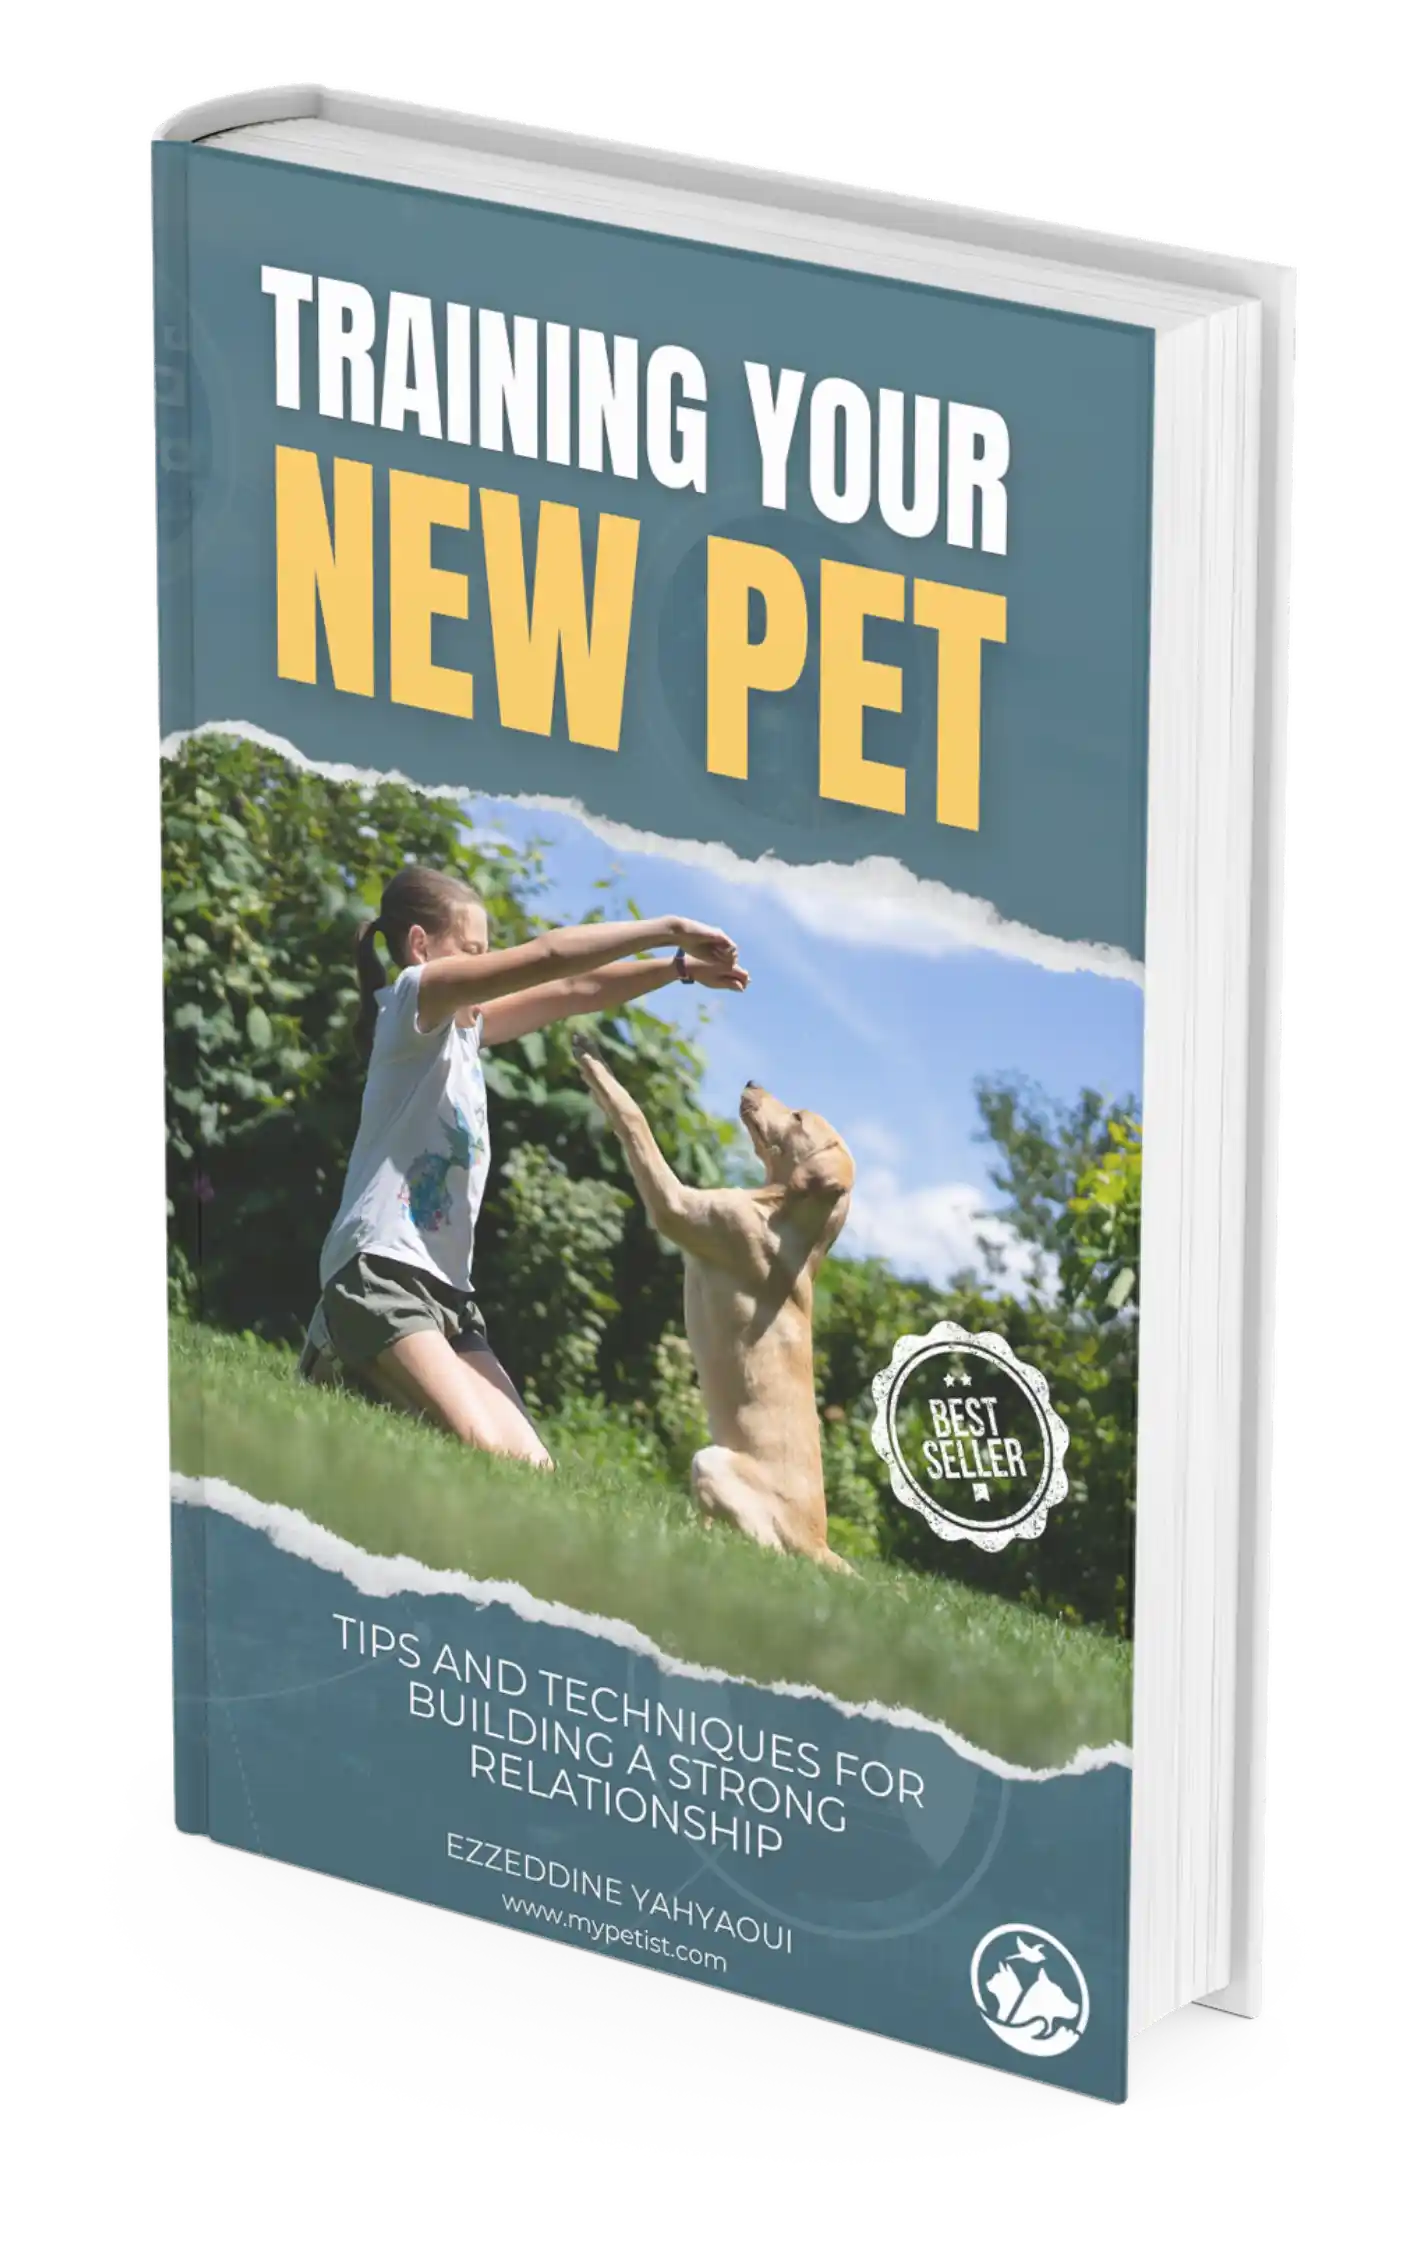 training-your-new-pet-tips-and-techniques-for-building-a-strong-relationship